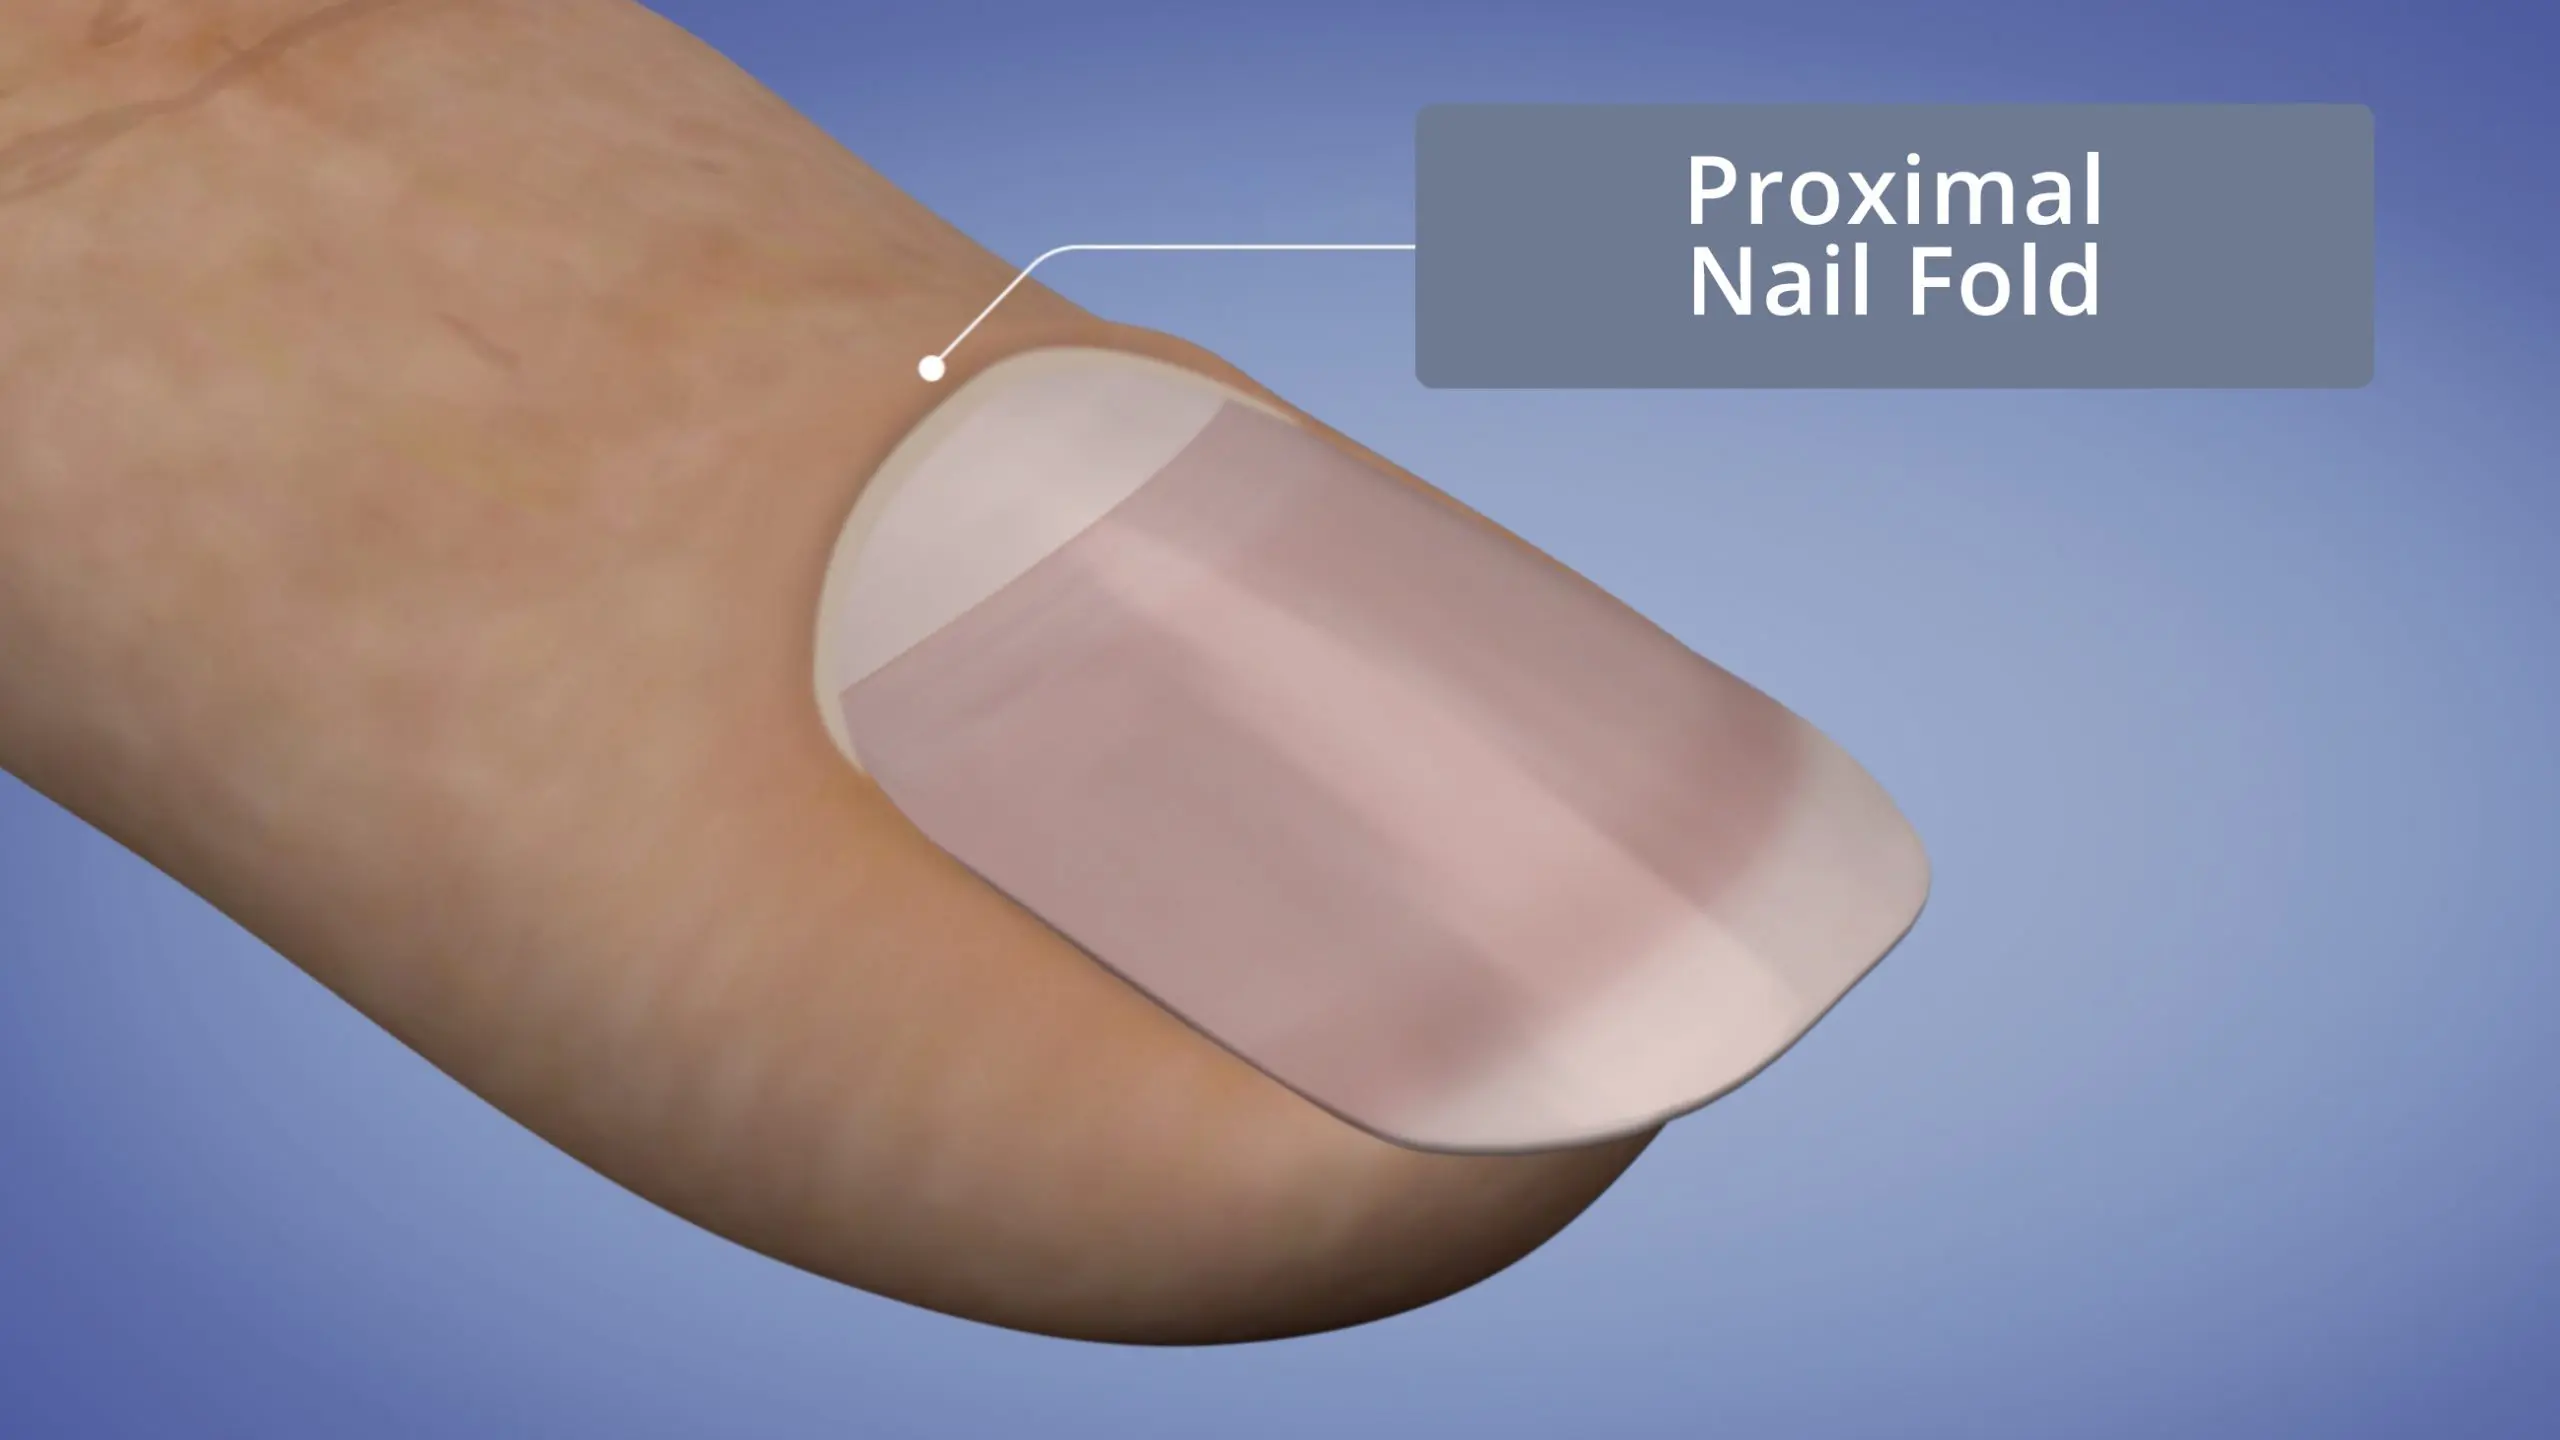 What is the Proximal Nail Fold